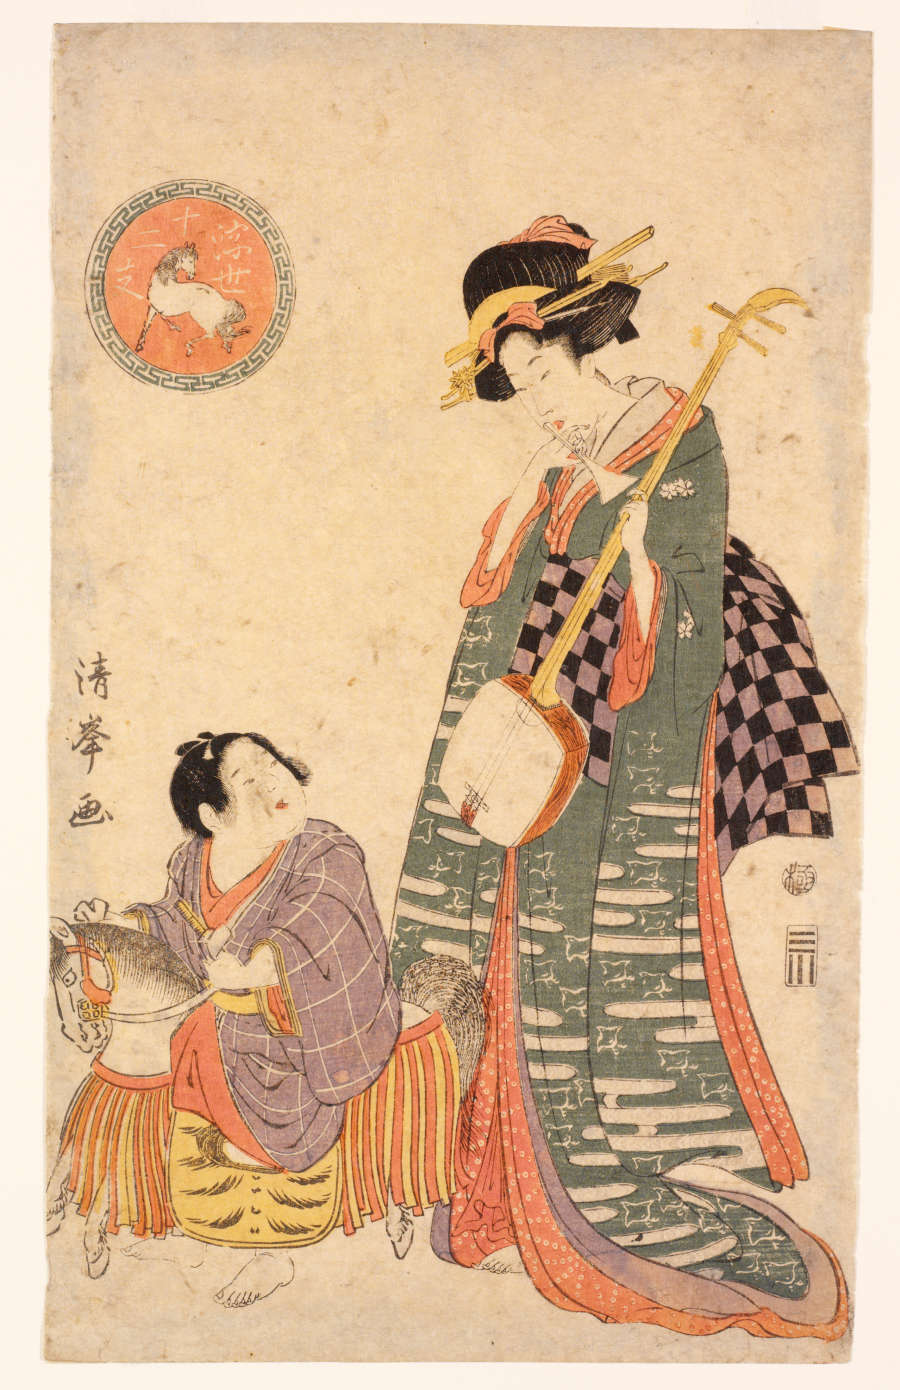 A woodblock print of a green-robed woman holding a three-stringed musical instrument. She looks down at a child on a hobbyhorse. A picture of a white horse is framed above.